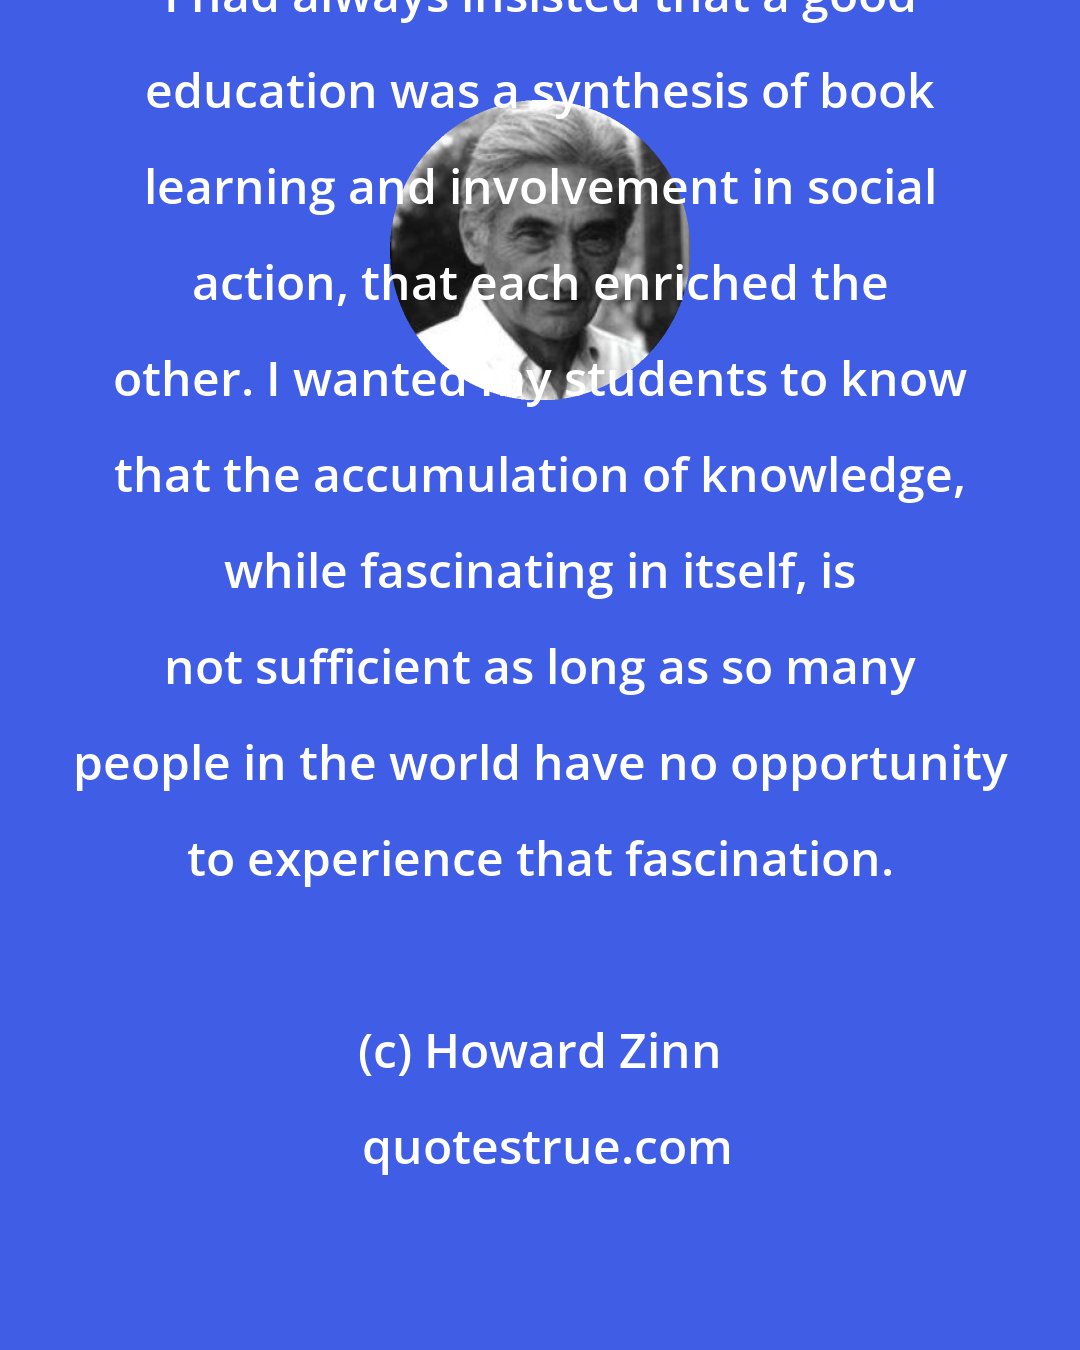 Howard Zinn: I had always insisted that a good education was a synthesis of book learning and involvement in social action, that each enriched the other. I wanted my students to know that the accumulation of knowledge, while fascinating in itself, is not sufficient as long as so many people in the world have no opportunity to experience that fascination.